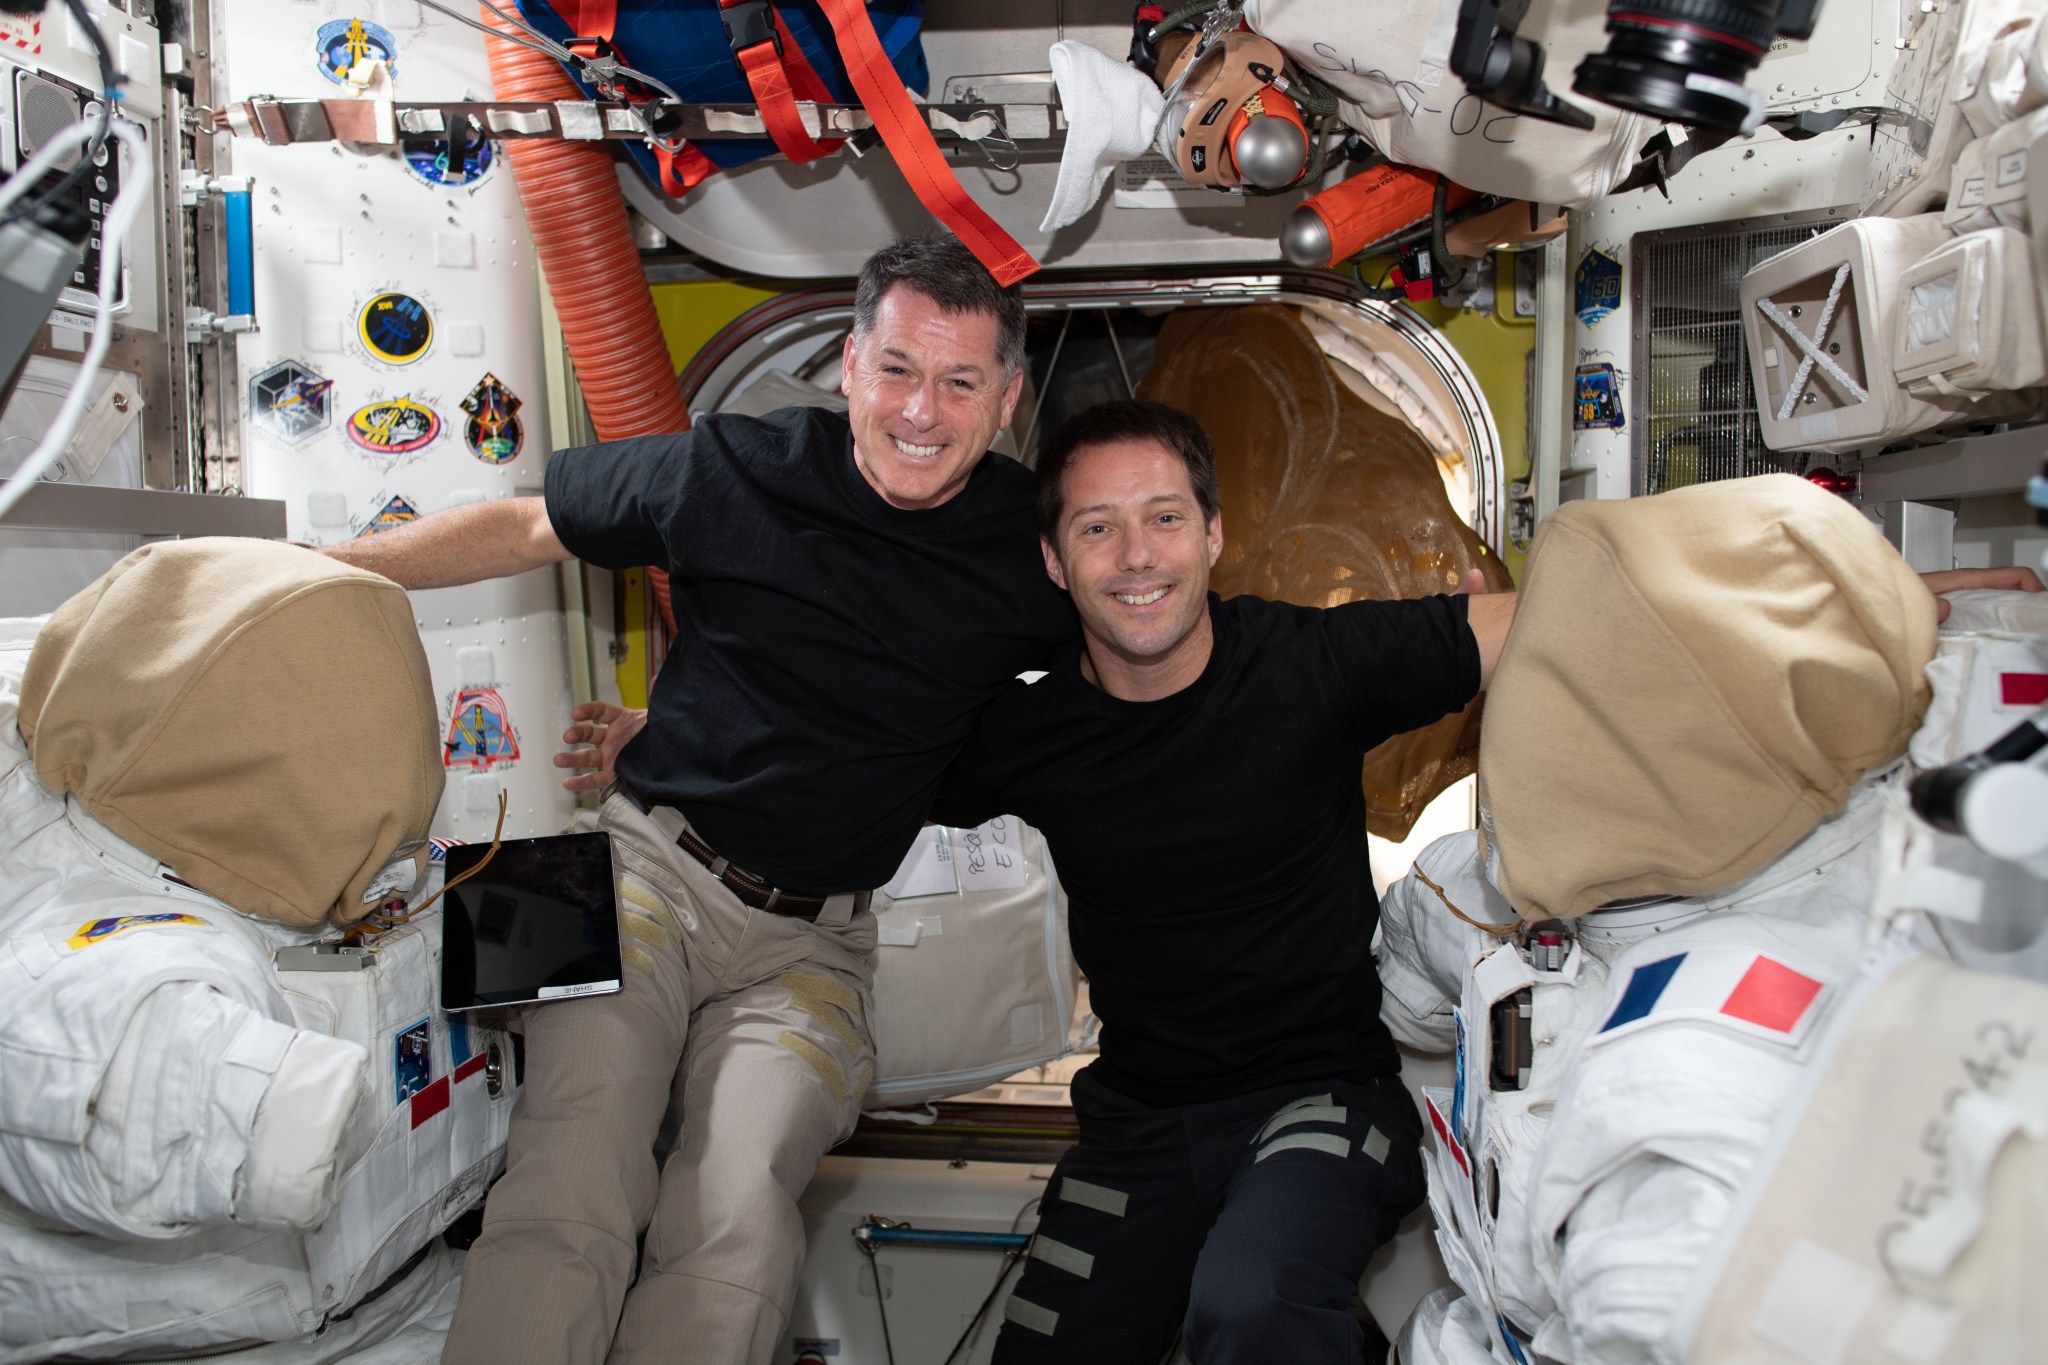 Expedition 65 Flight Engineers Shane Kimbrough of NASA (left) and Thomas Pesquet of ESA (European Space Agency) pose for a portrait while working on U.S. spacesuits inside the International Space Station's U.S. Quest airlock.